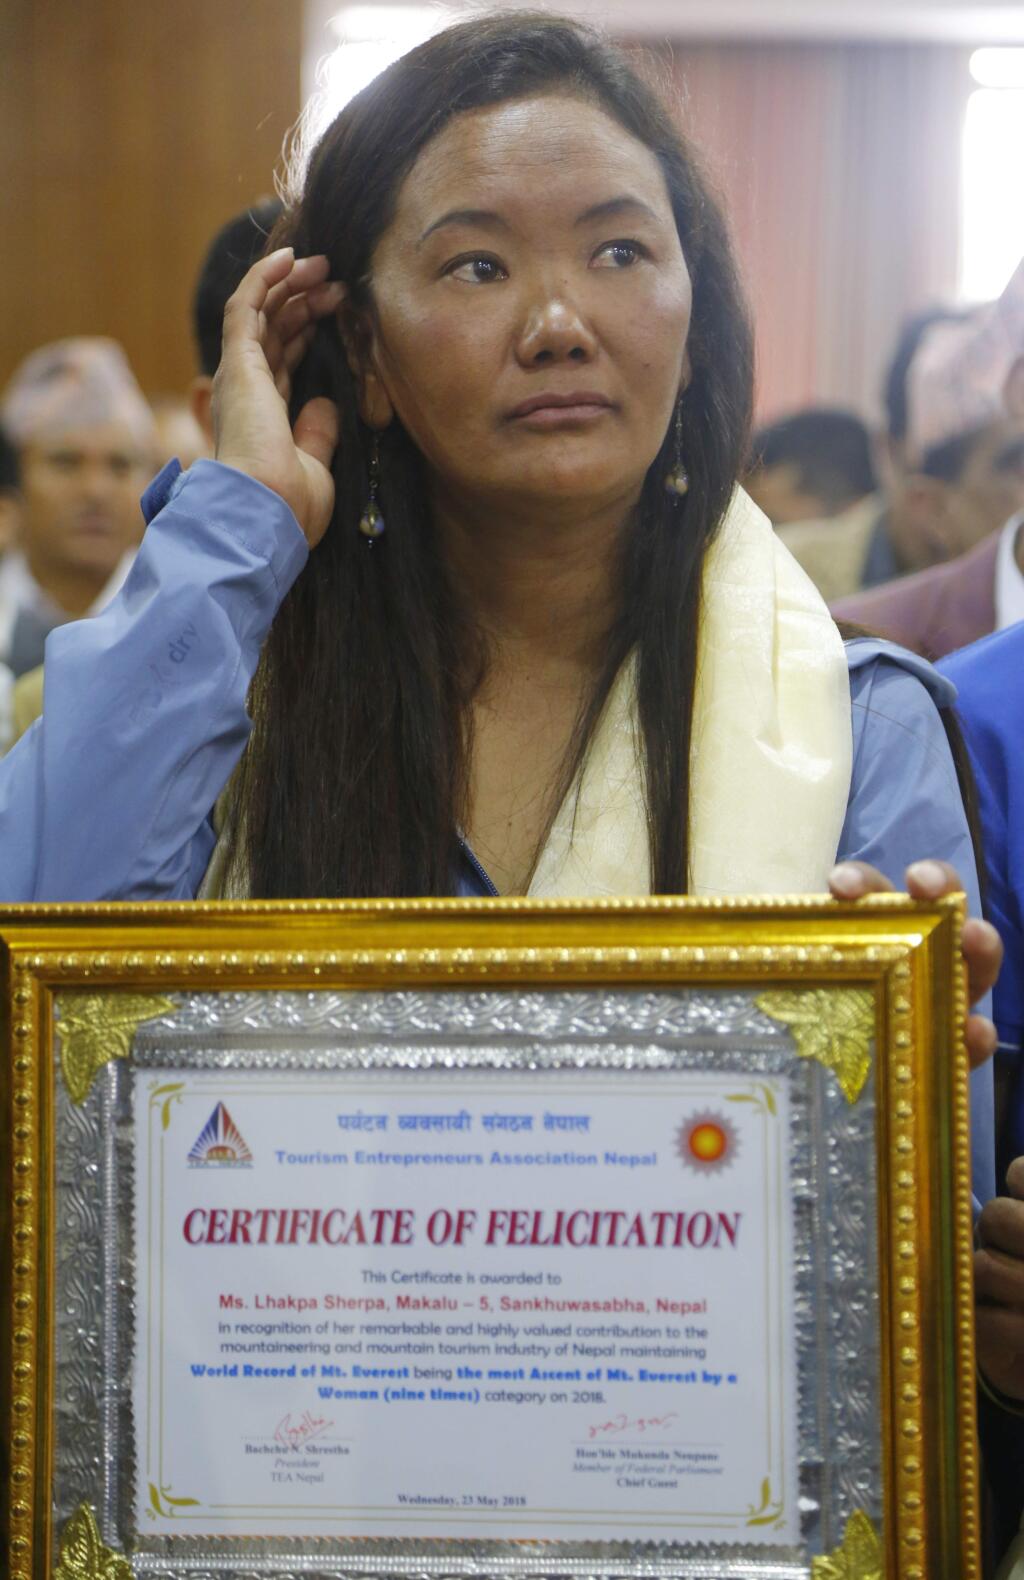 Nepalese woman climber Lhakpa Sherpa holds an honorary certificate in Kathmandu, Nepal, Wednesday, May 23, 2018. Lhakpa Sherpa scaled the 8,850-meter (29,035-foot) peak last week, breaking her own record for the most climbs by a woman. (AP Photo/Niranjan Shrestha)